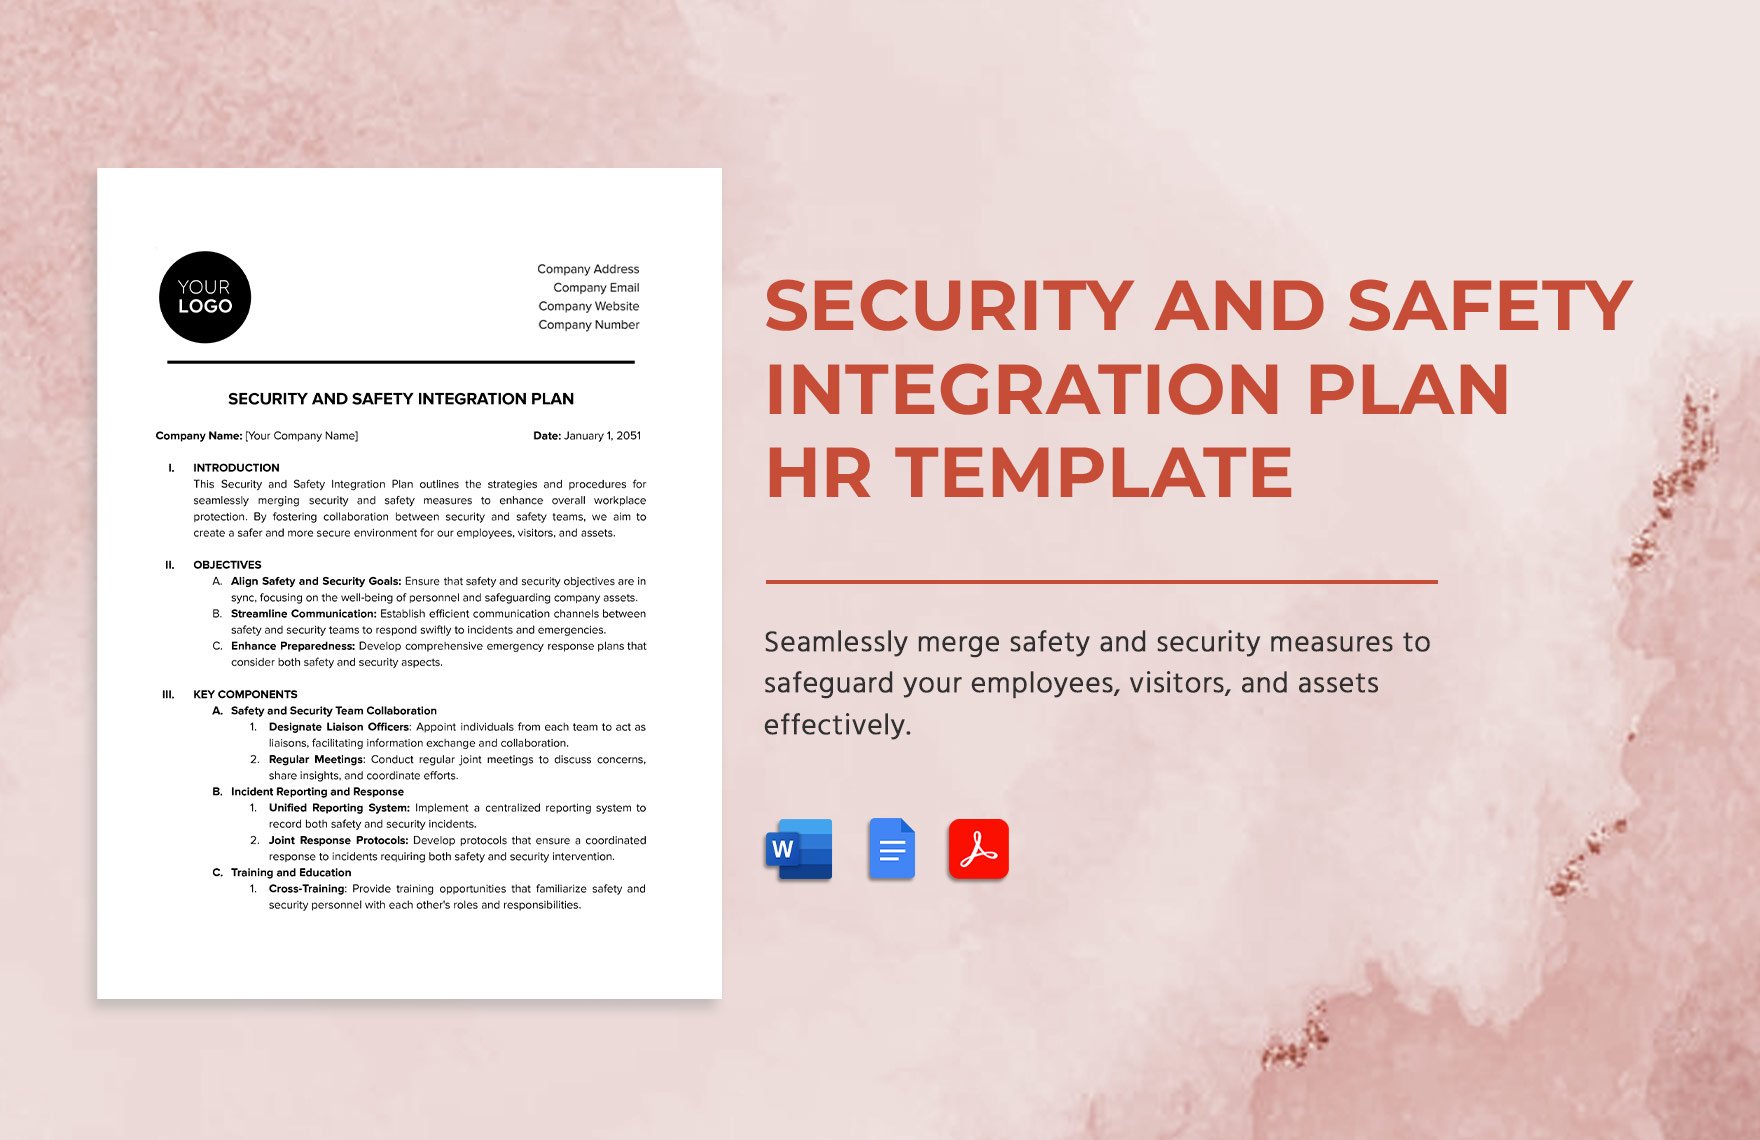 Security and Safety Integration Plan HR Template in Word, Google Docs, PDF